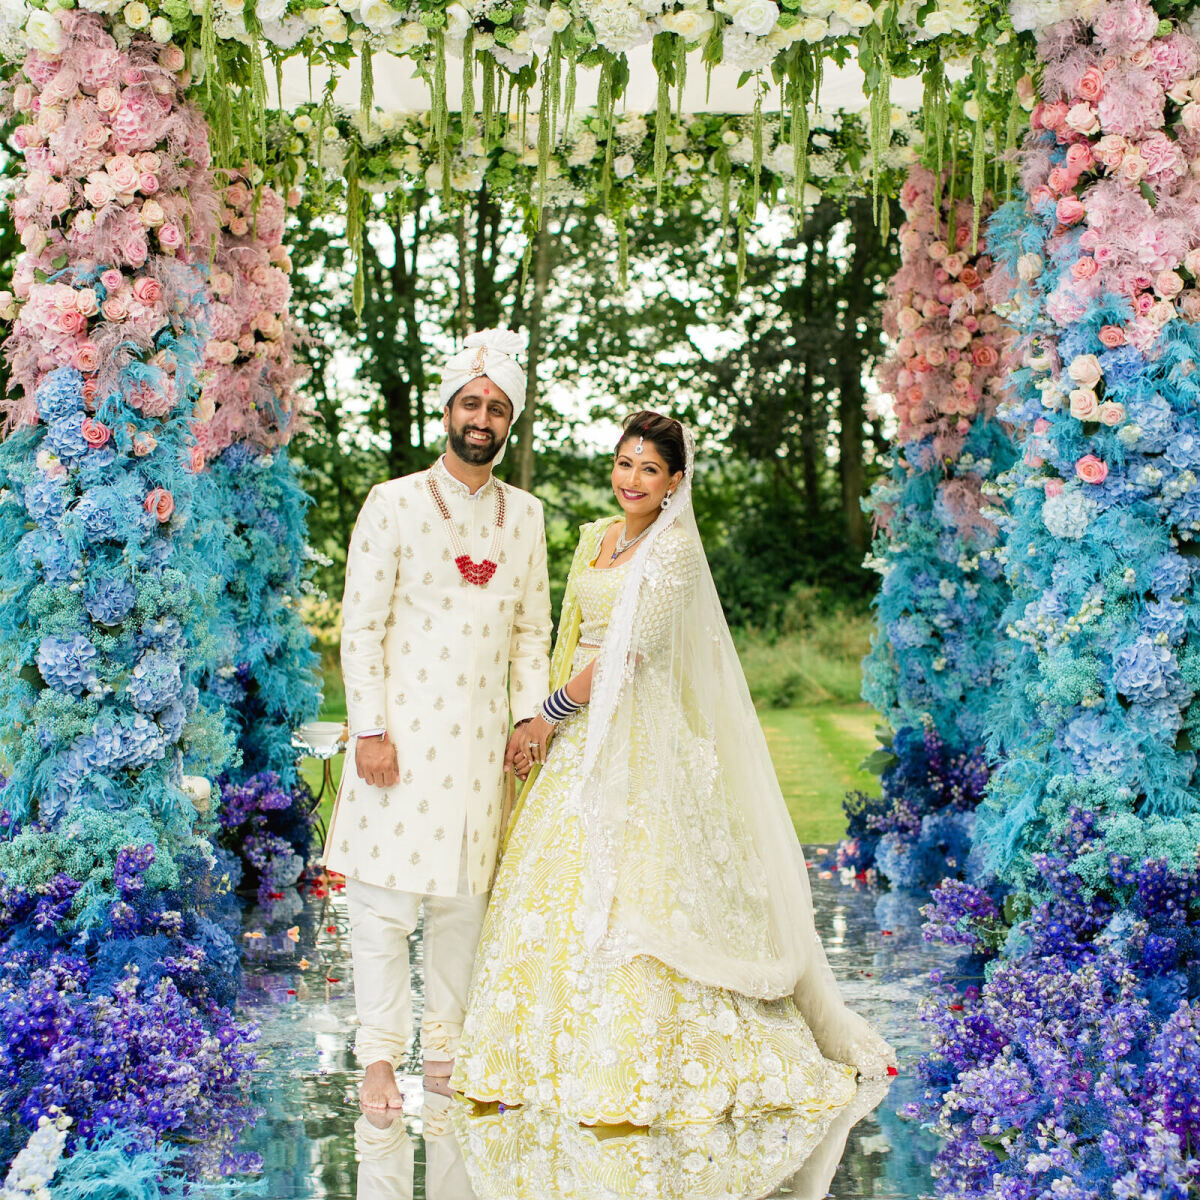 A groom and bride smile under their mandap at their beach-inspired colorful countryside wedding in England.